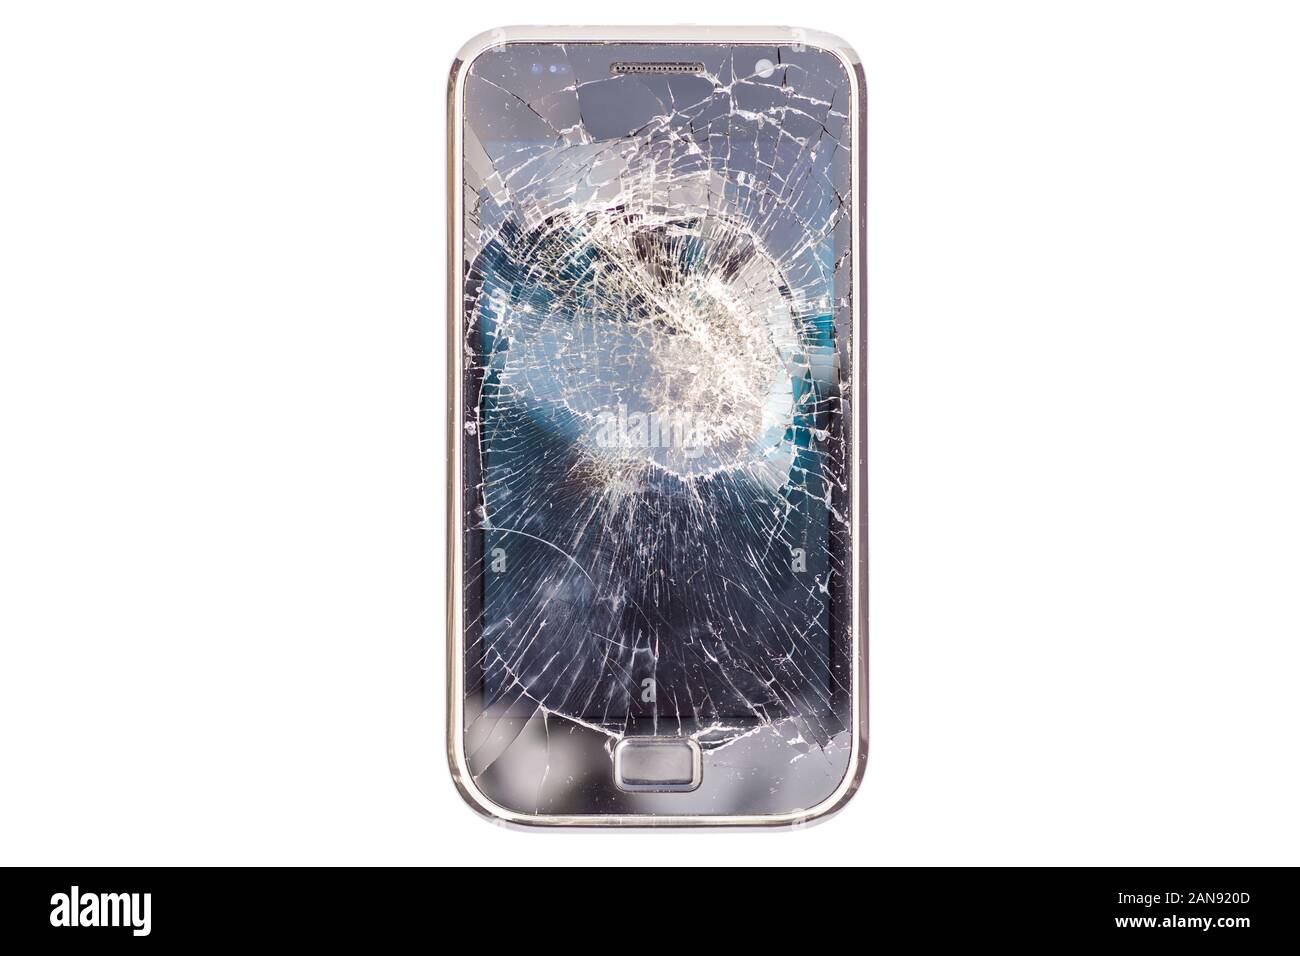 Broken smartphone as a metaphor for problems with mobile phone Stock Photo